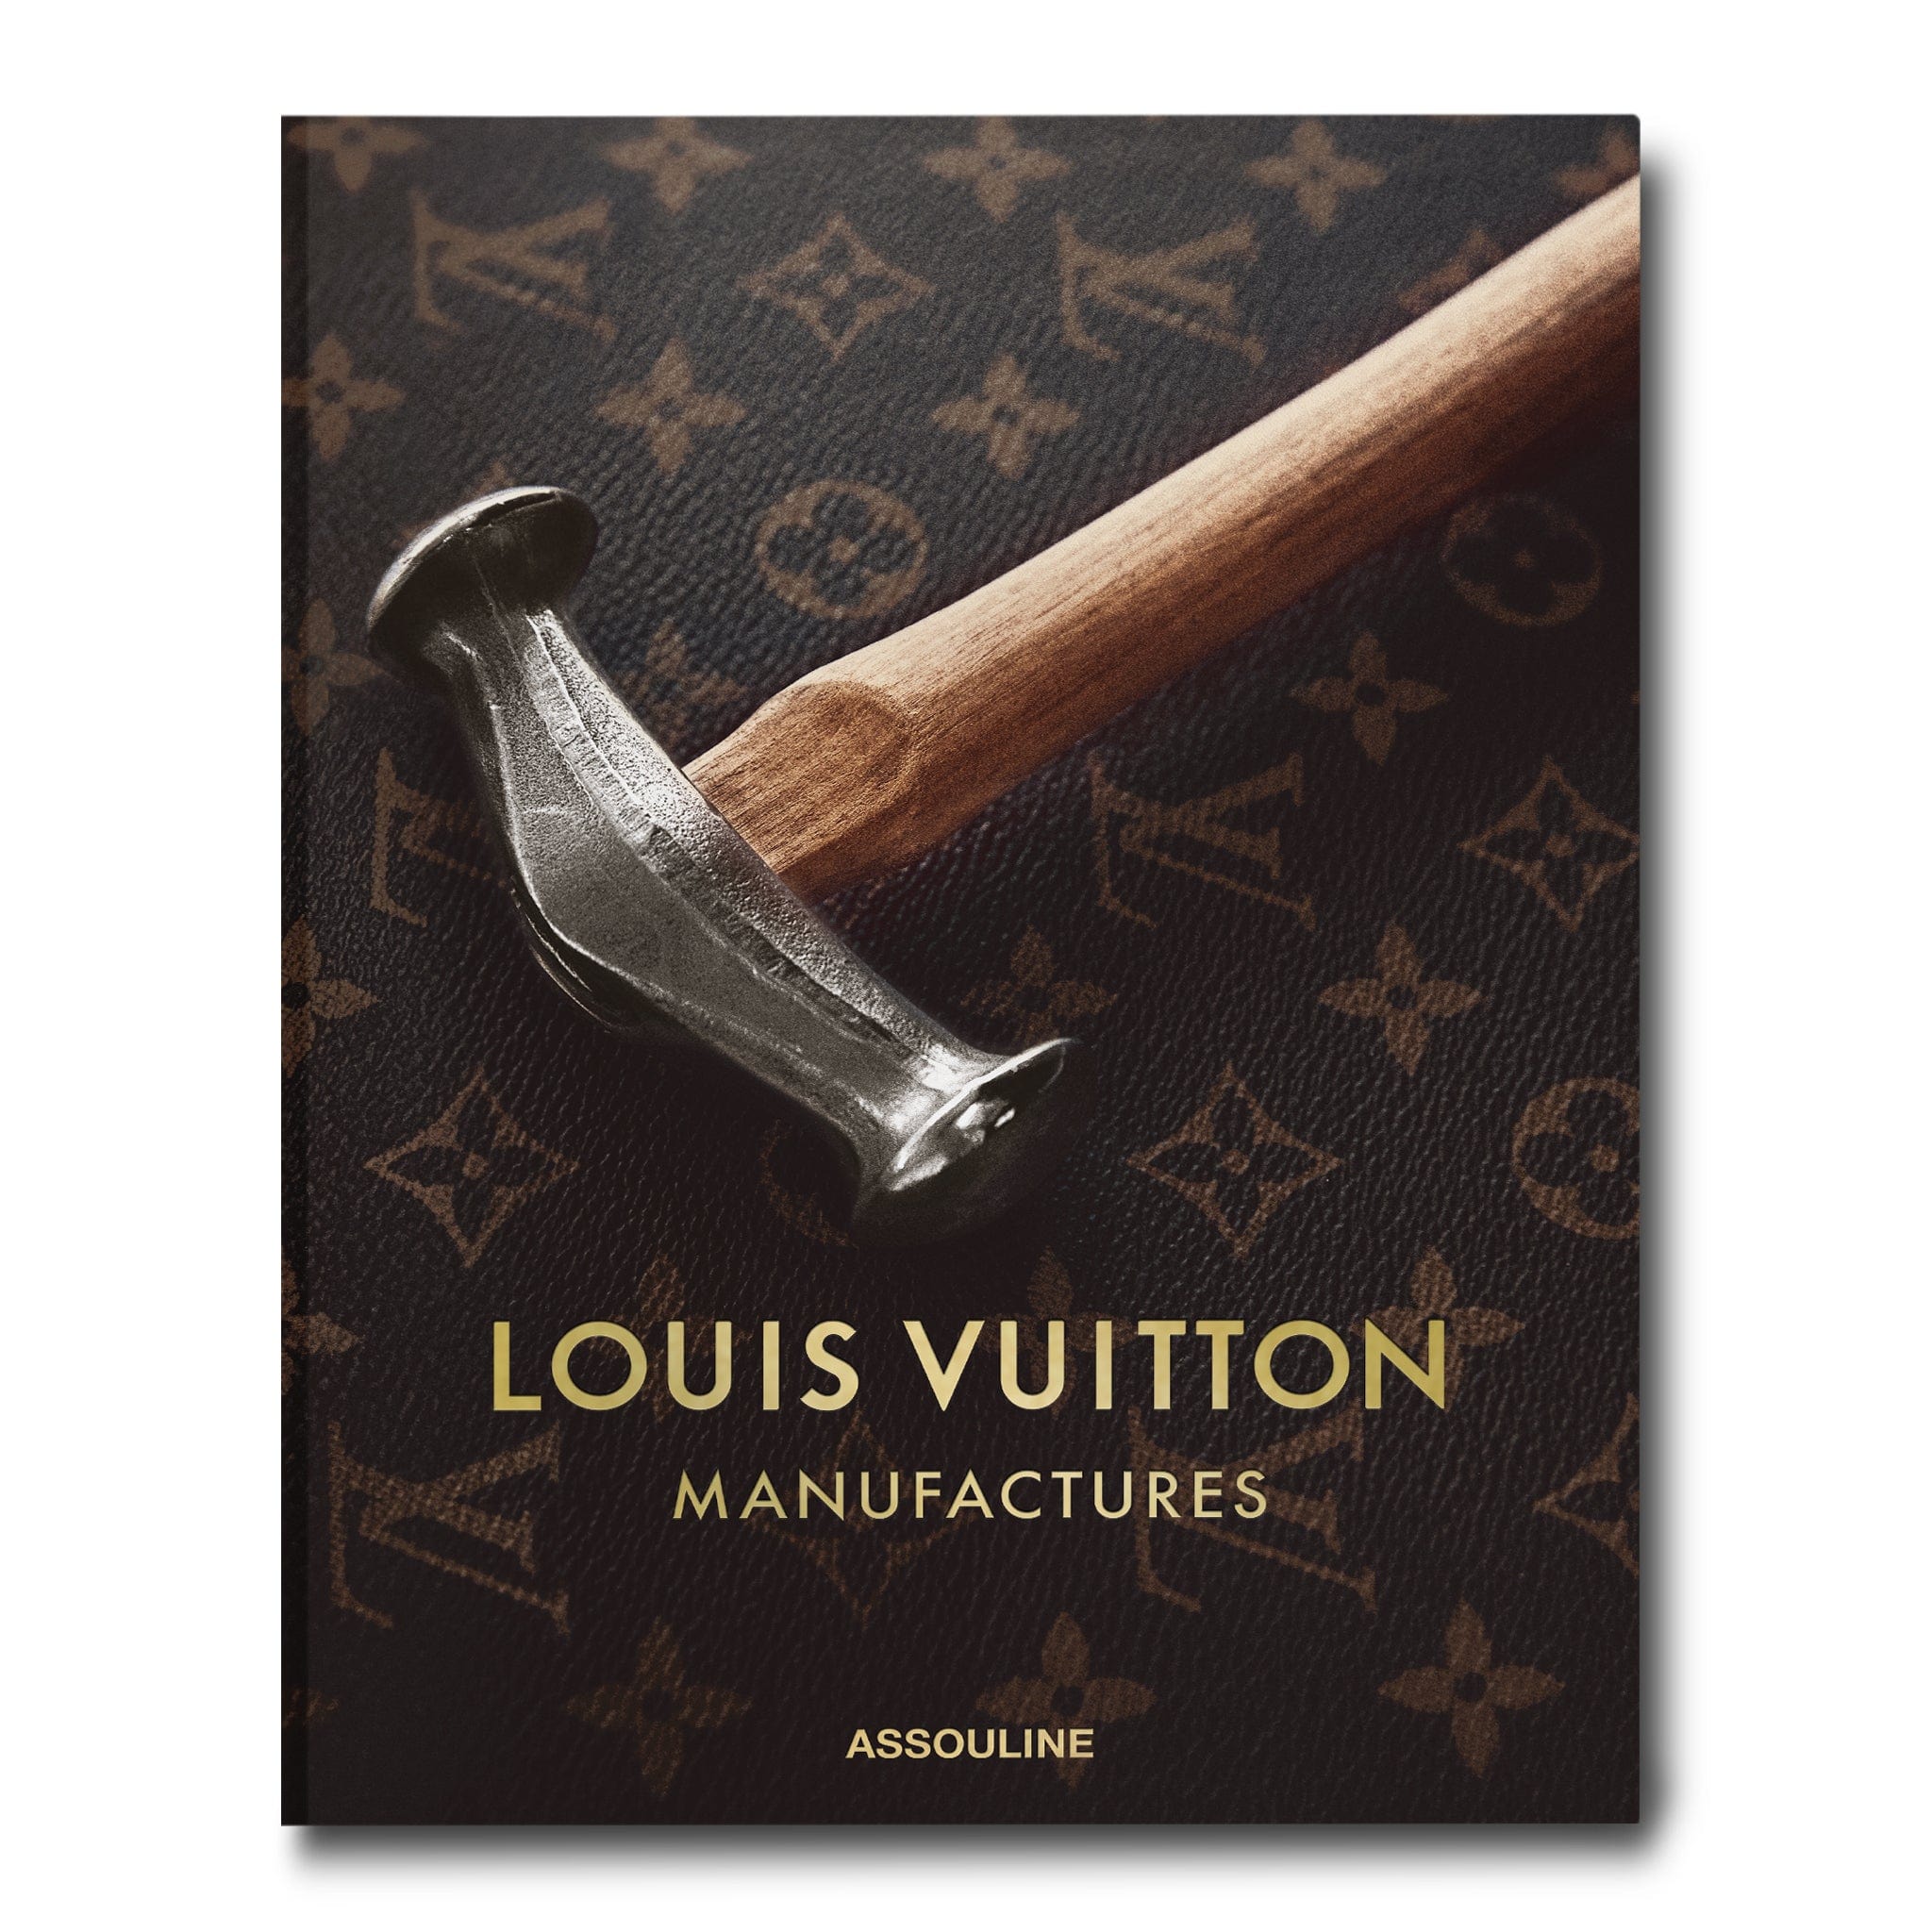 Louis Vuitton, Accents, New Lv Louis Vuitton Large Hardback Coffee Table  Book The Birth Of Modern Luxury